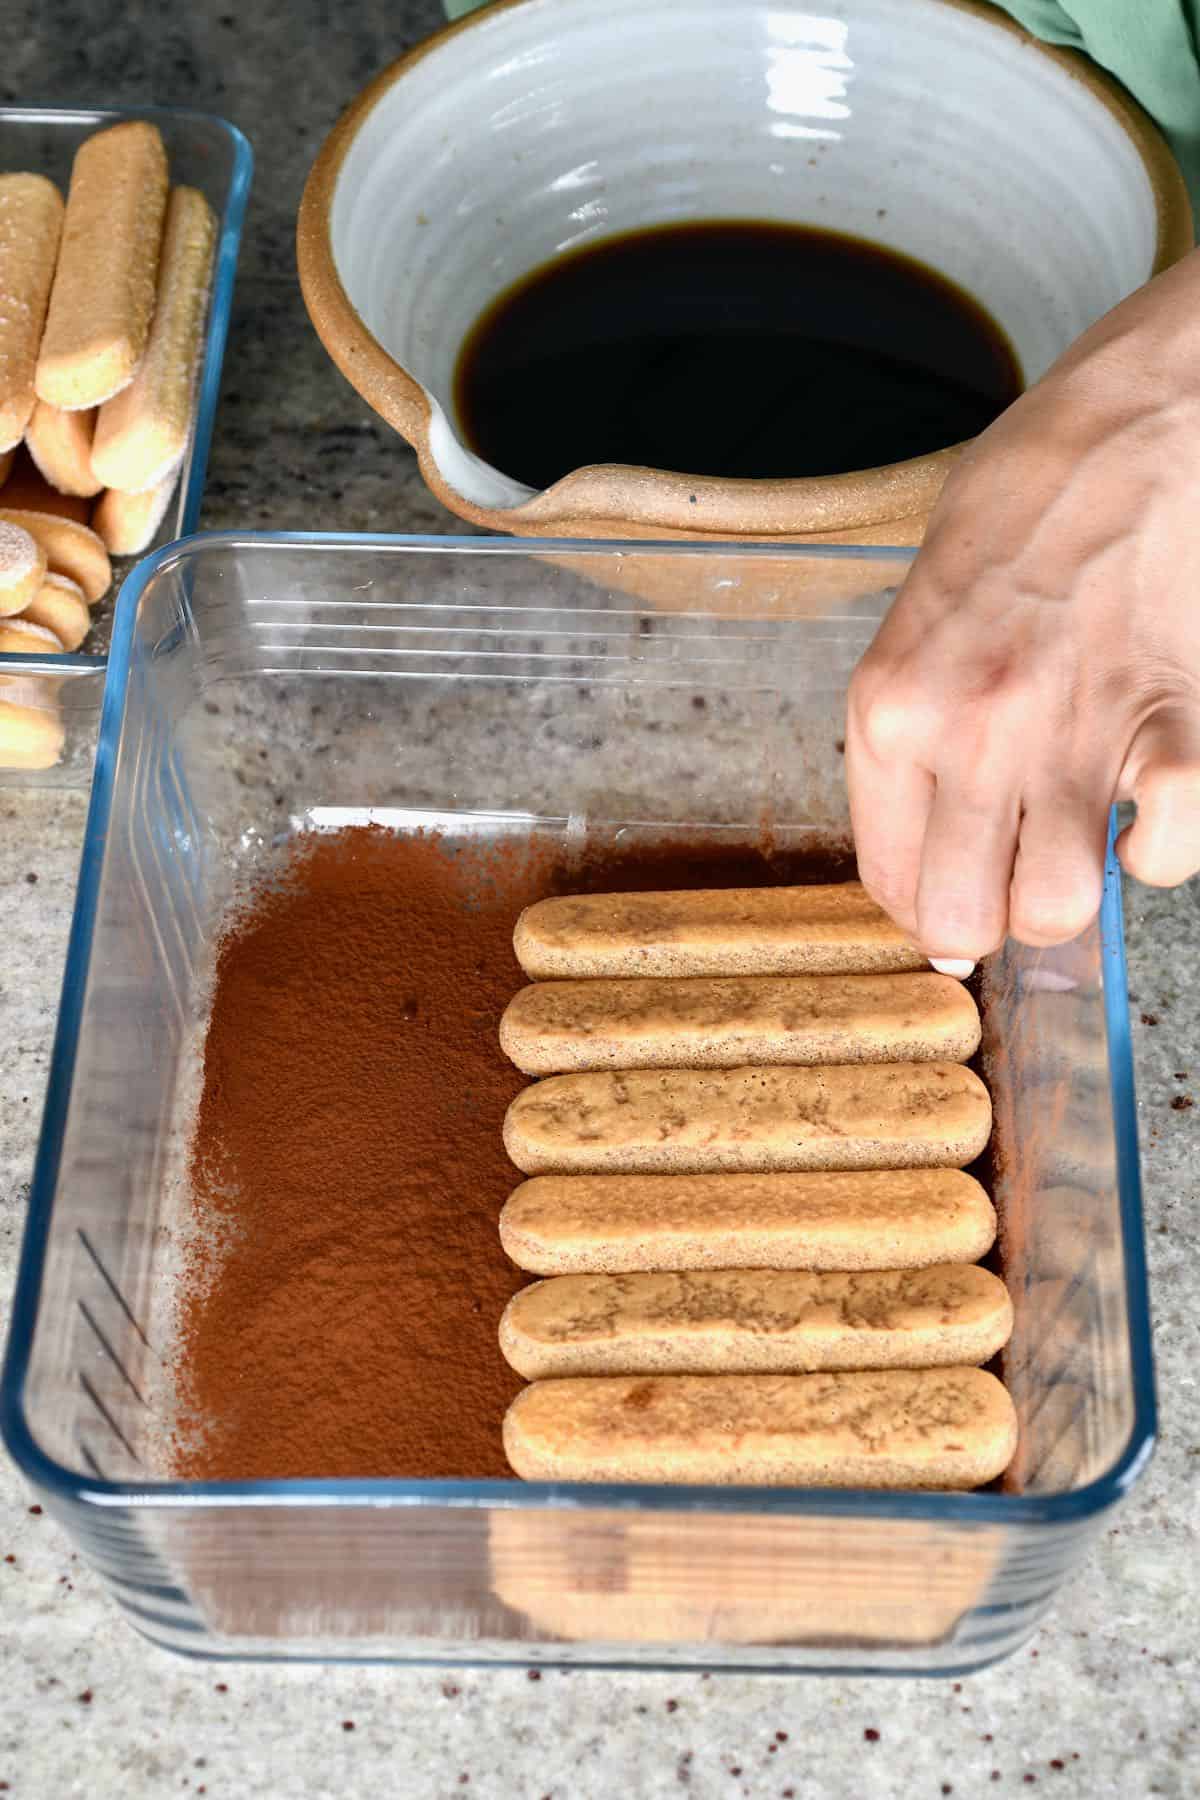 Arranging biscuits in a dish